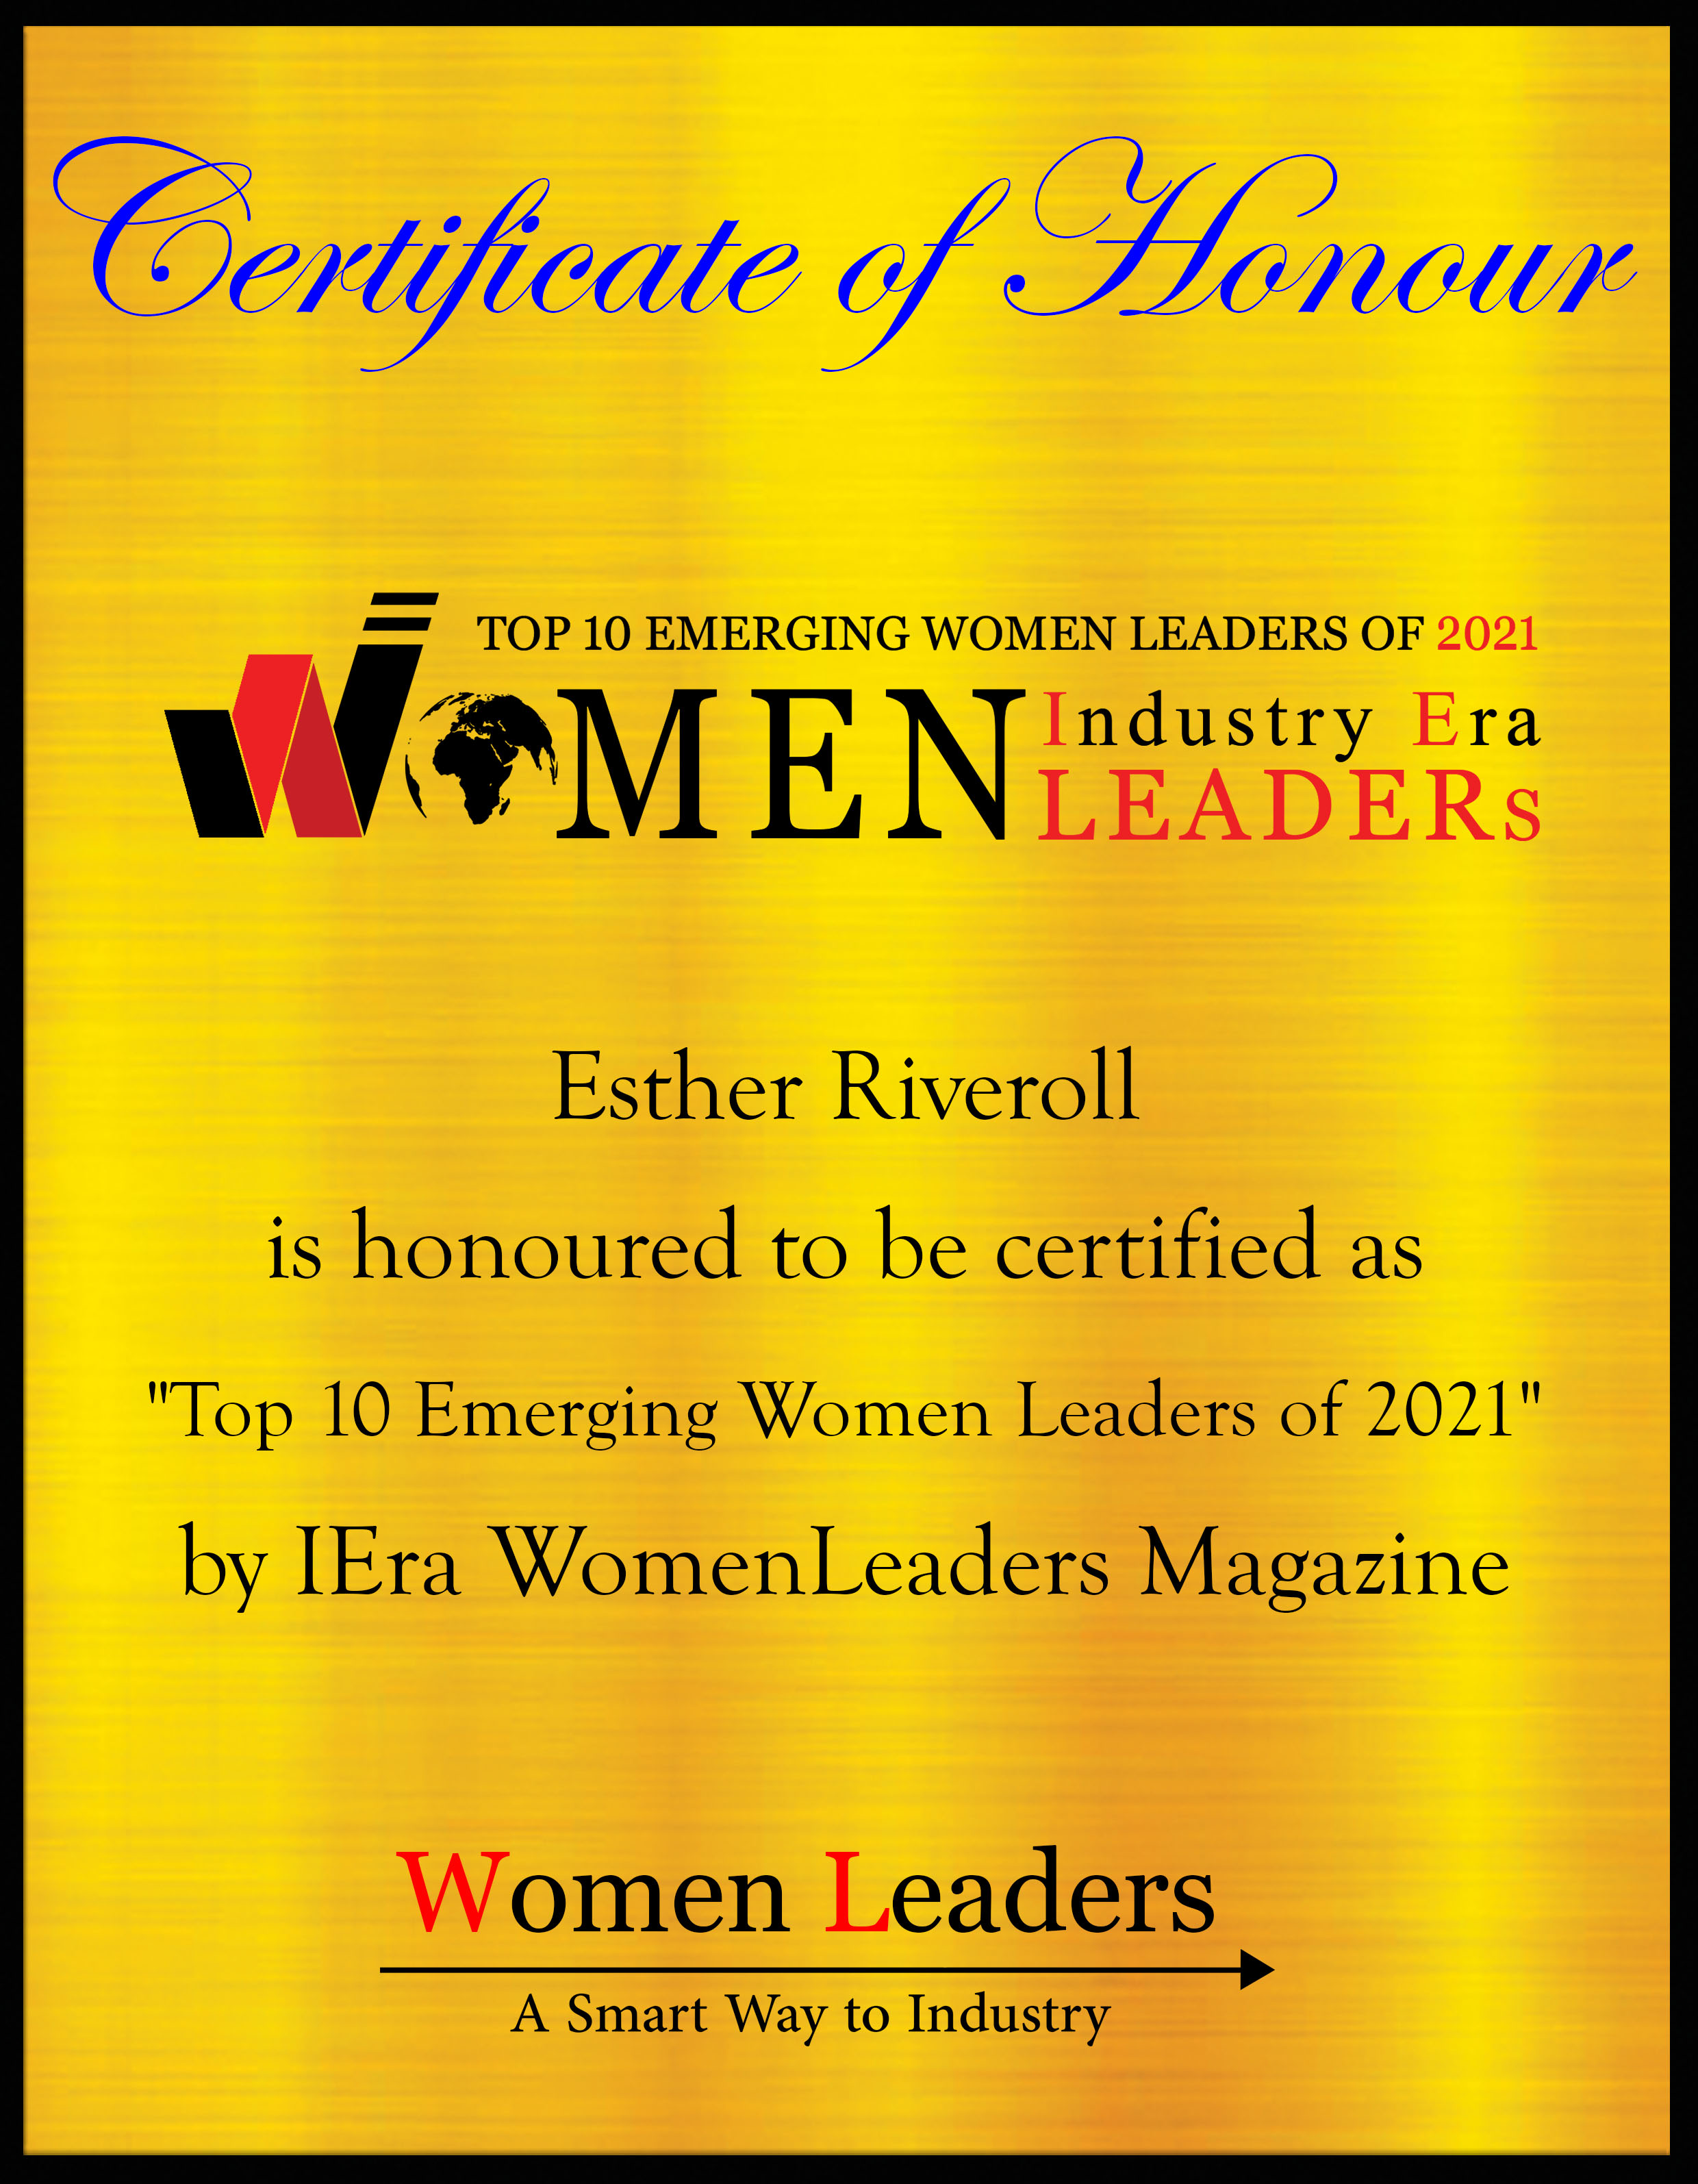 Esther Riveroll, Founder and CEO at Alldatum Business, Most Empowering Women Leaders of 2021